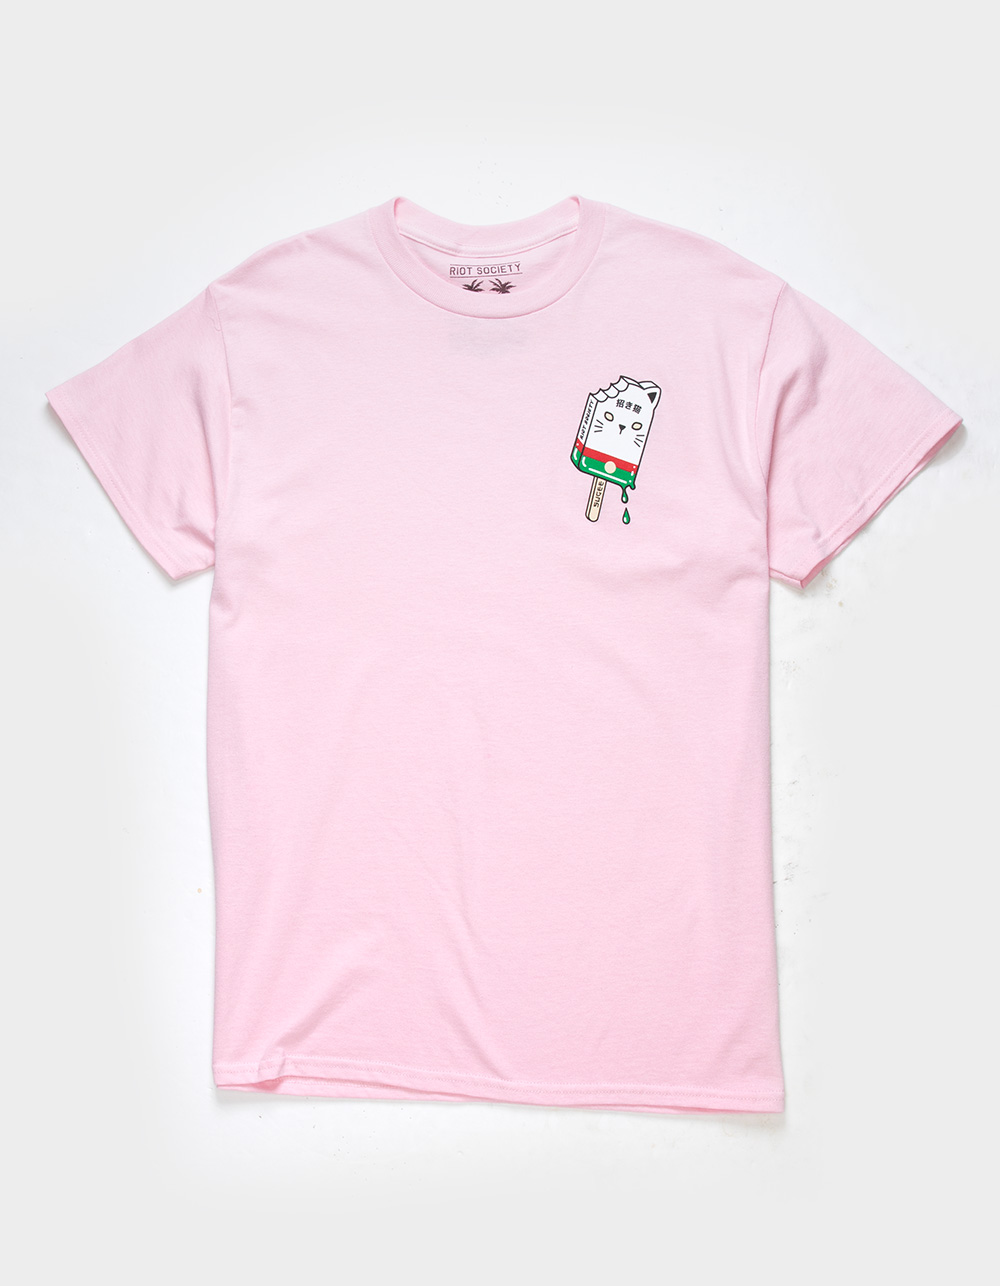 RIOT SOCIETY Sugee Cat Popsicle Mens Tee